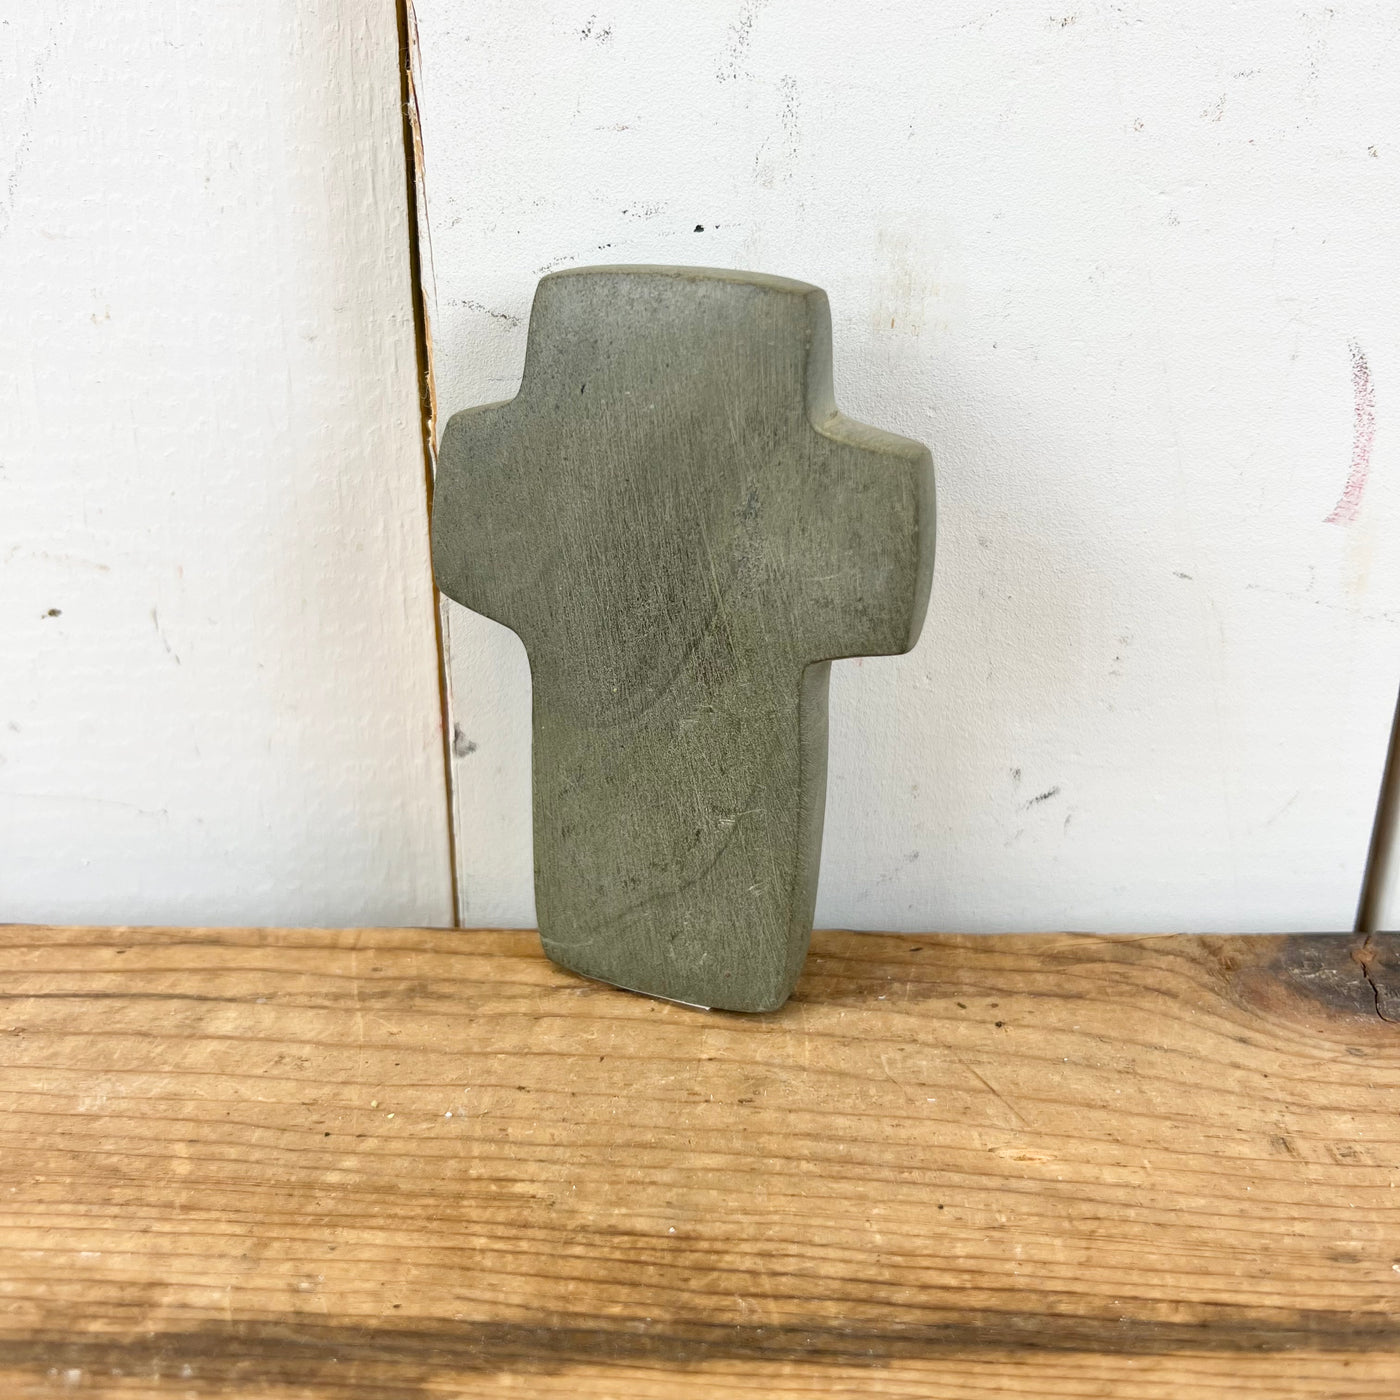 Marbled Stone Crosses